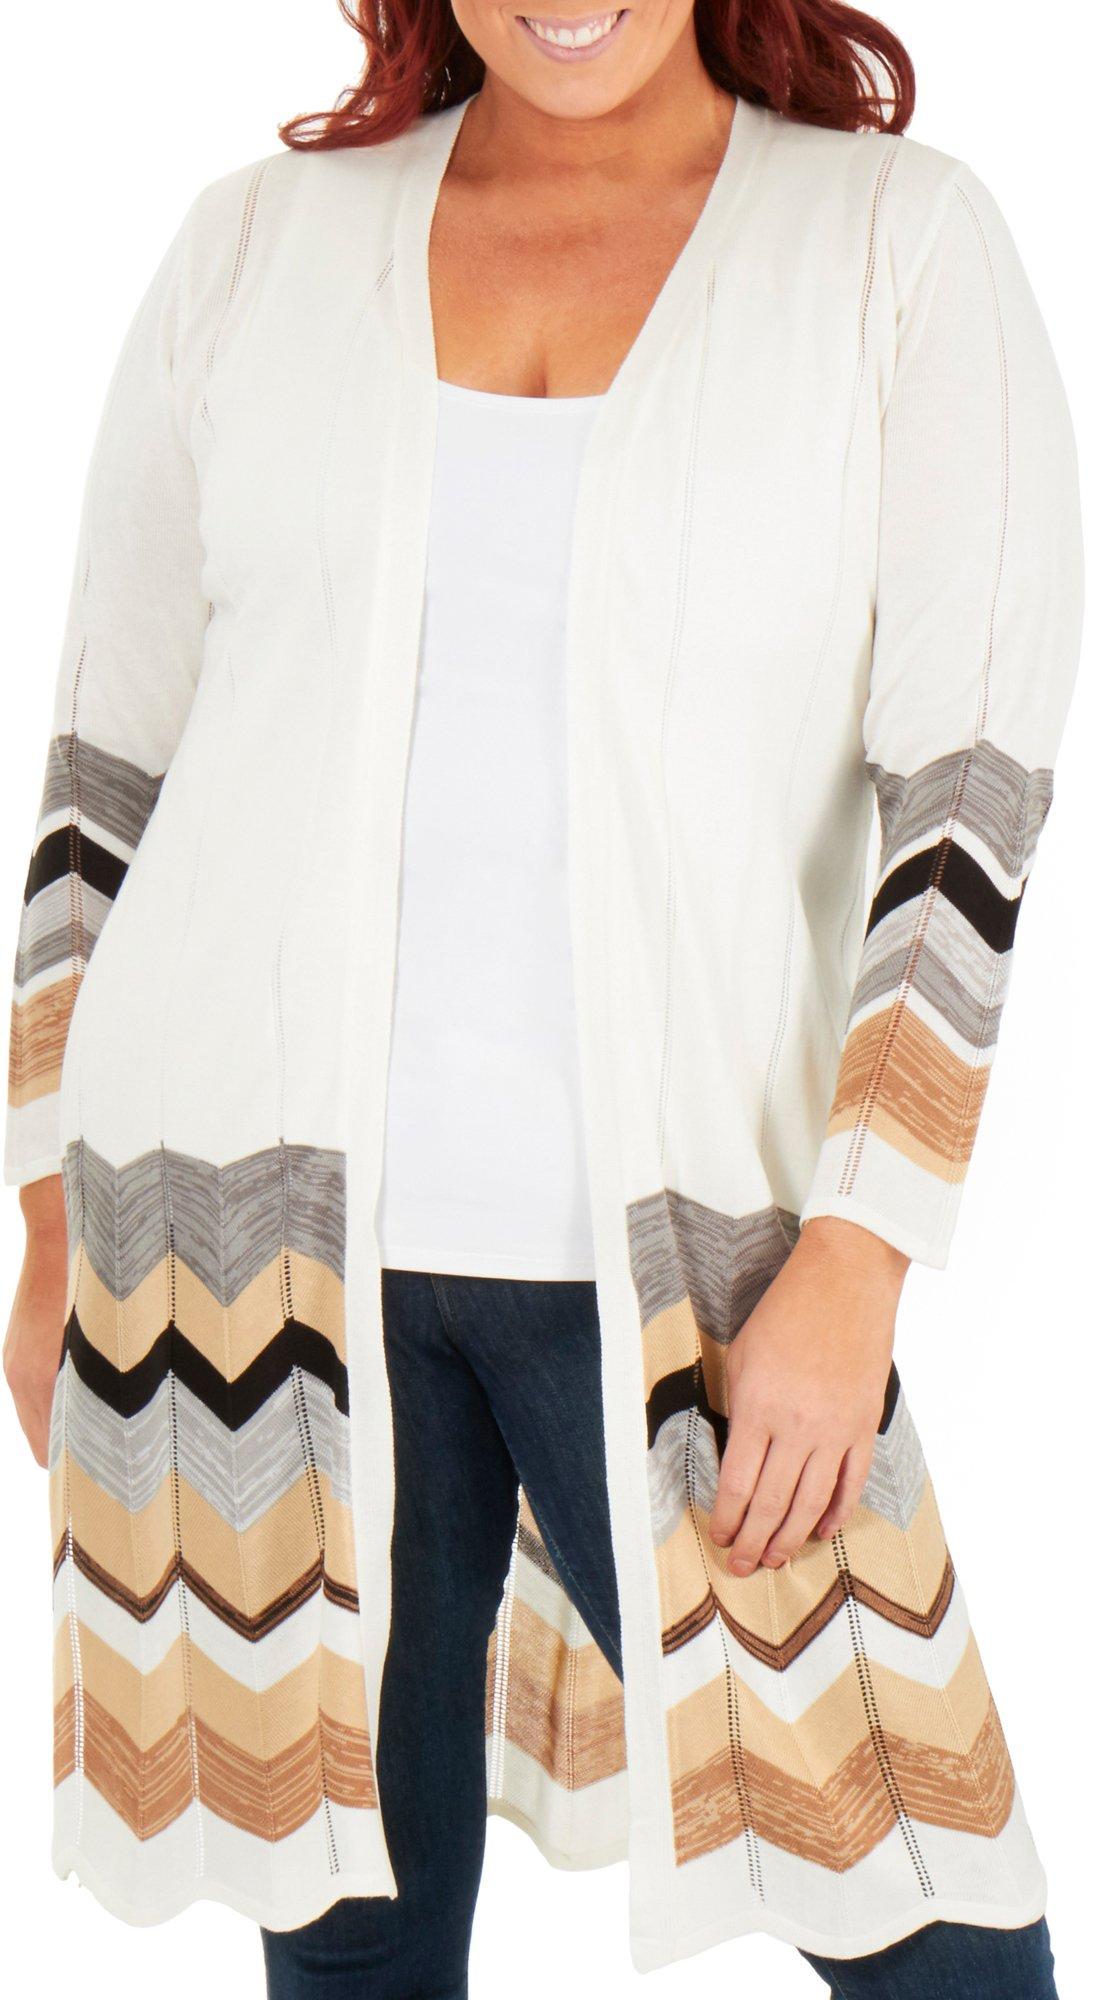 NY Collection Plus Chevron Open Front Cardigan